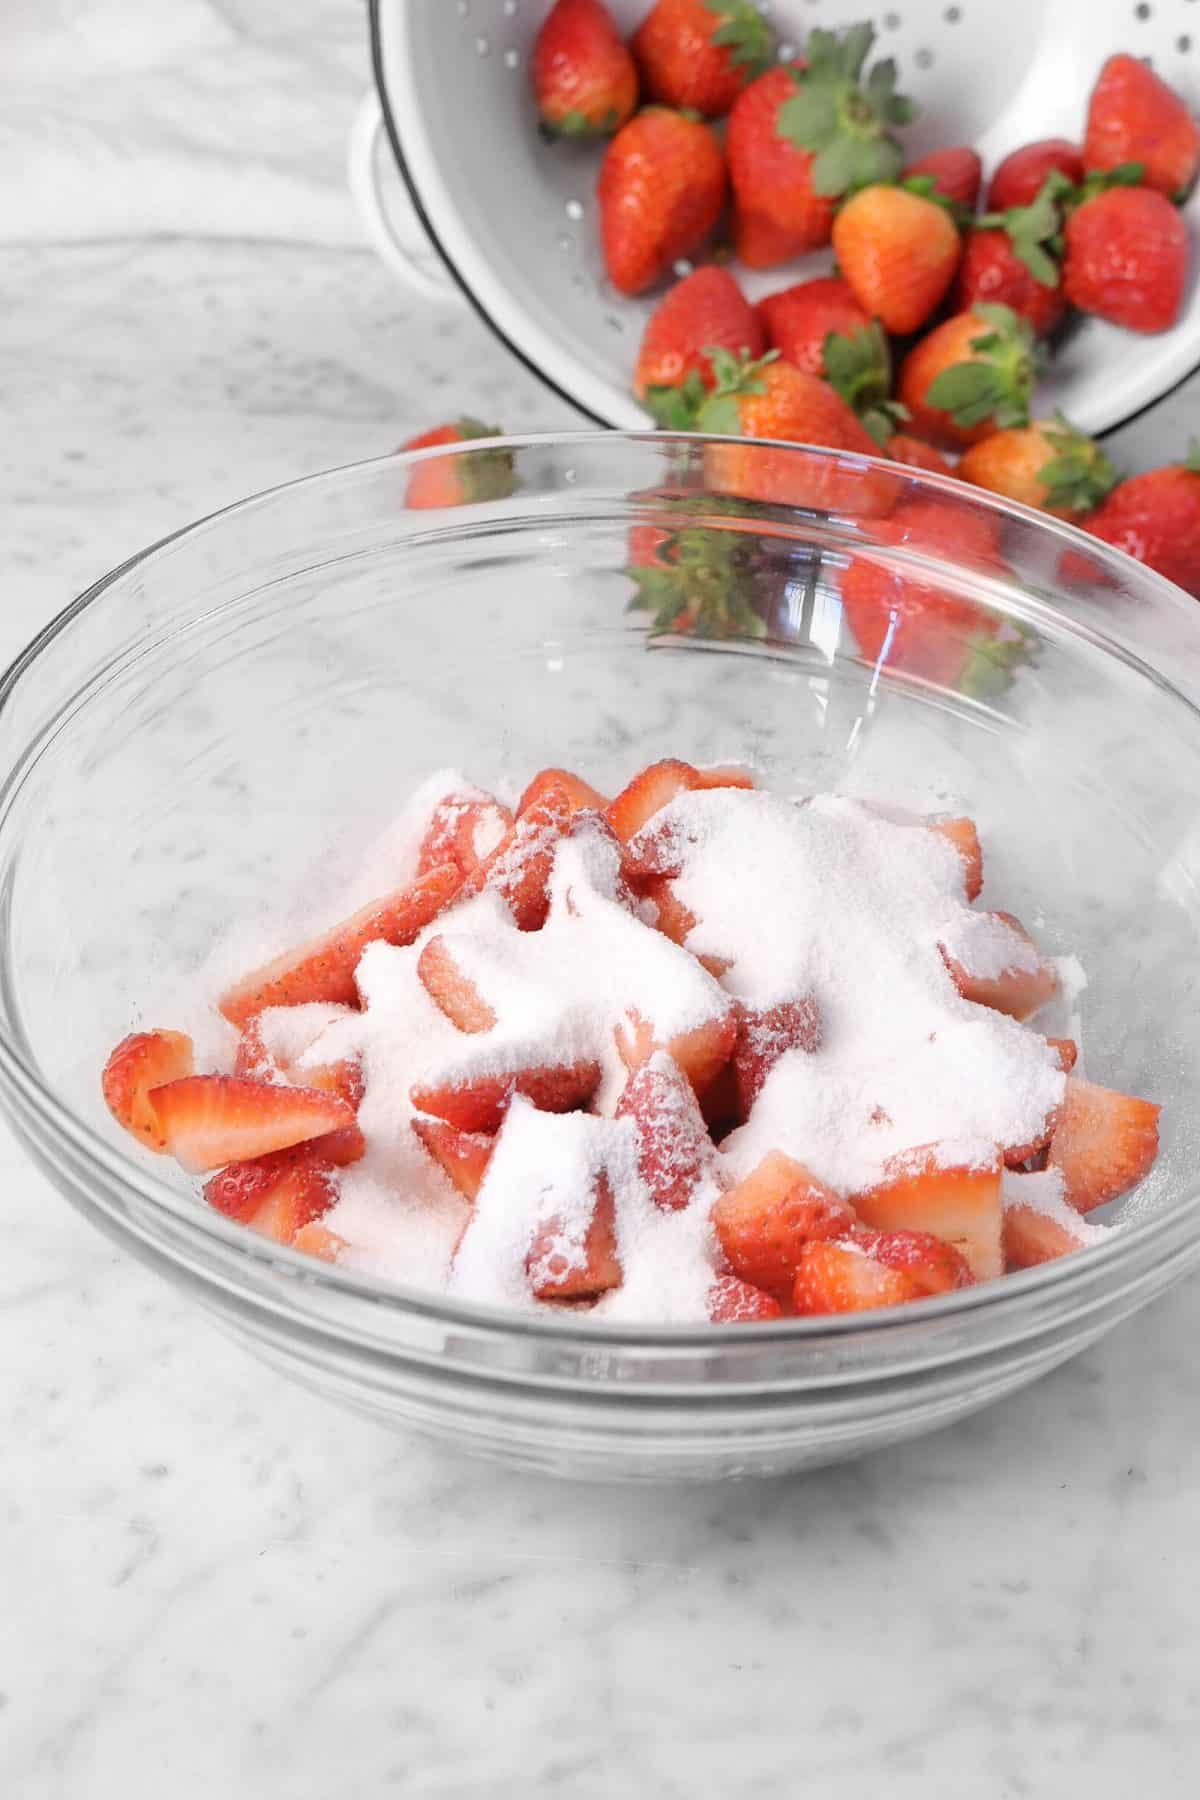 sugar on top of the strawberries in a glass bowl